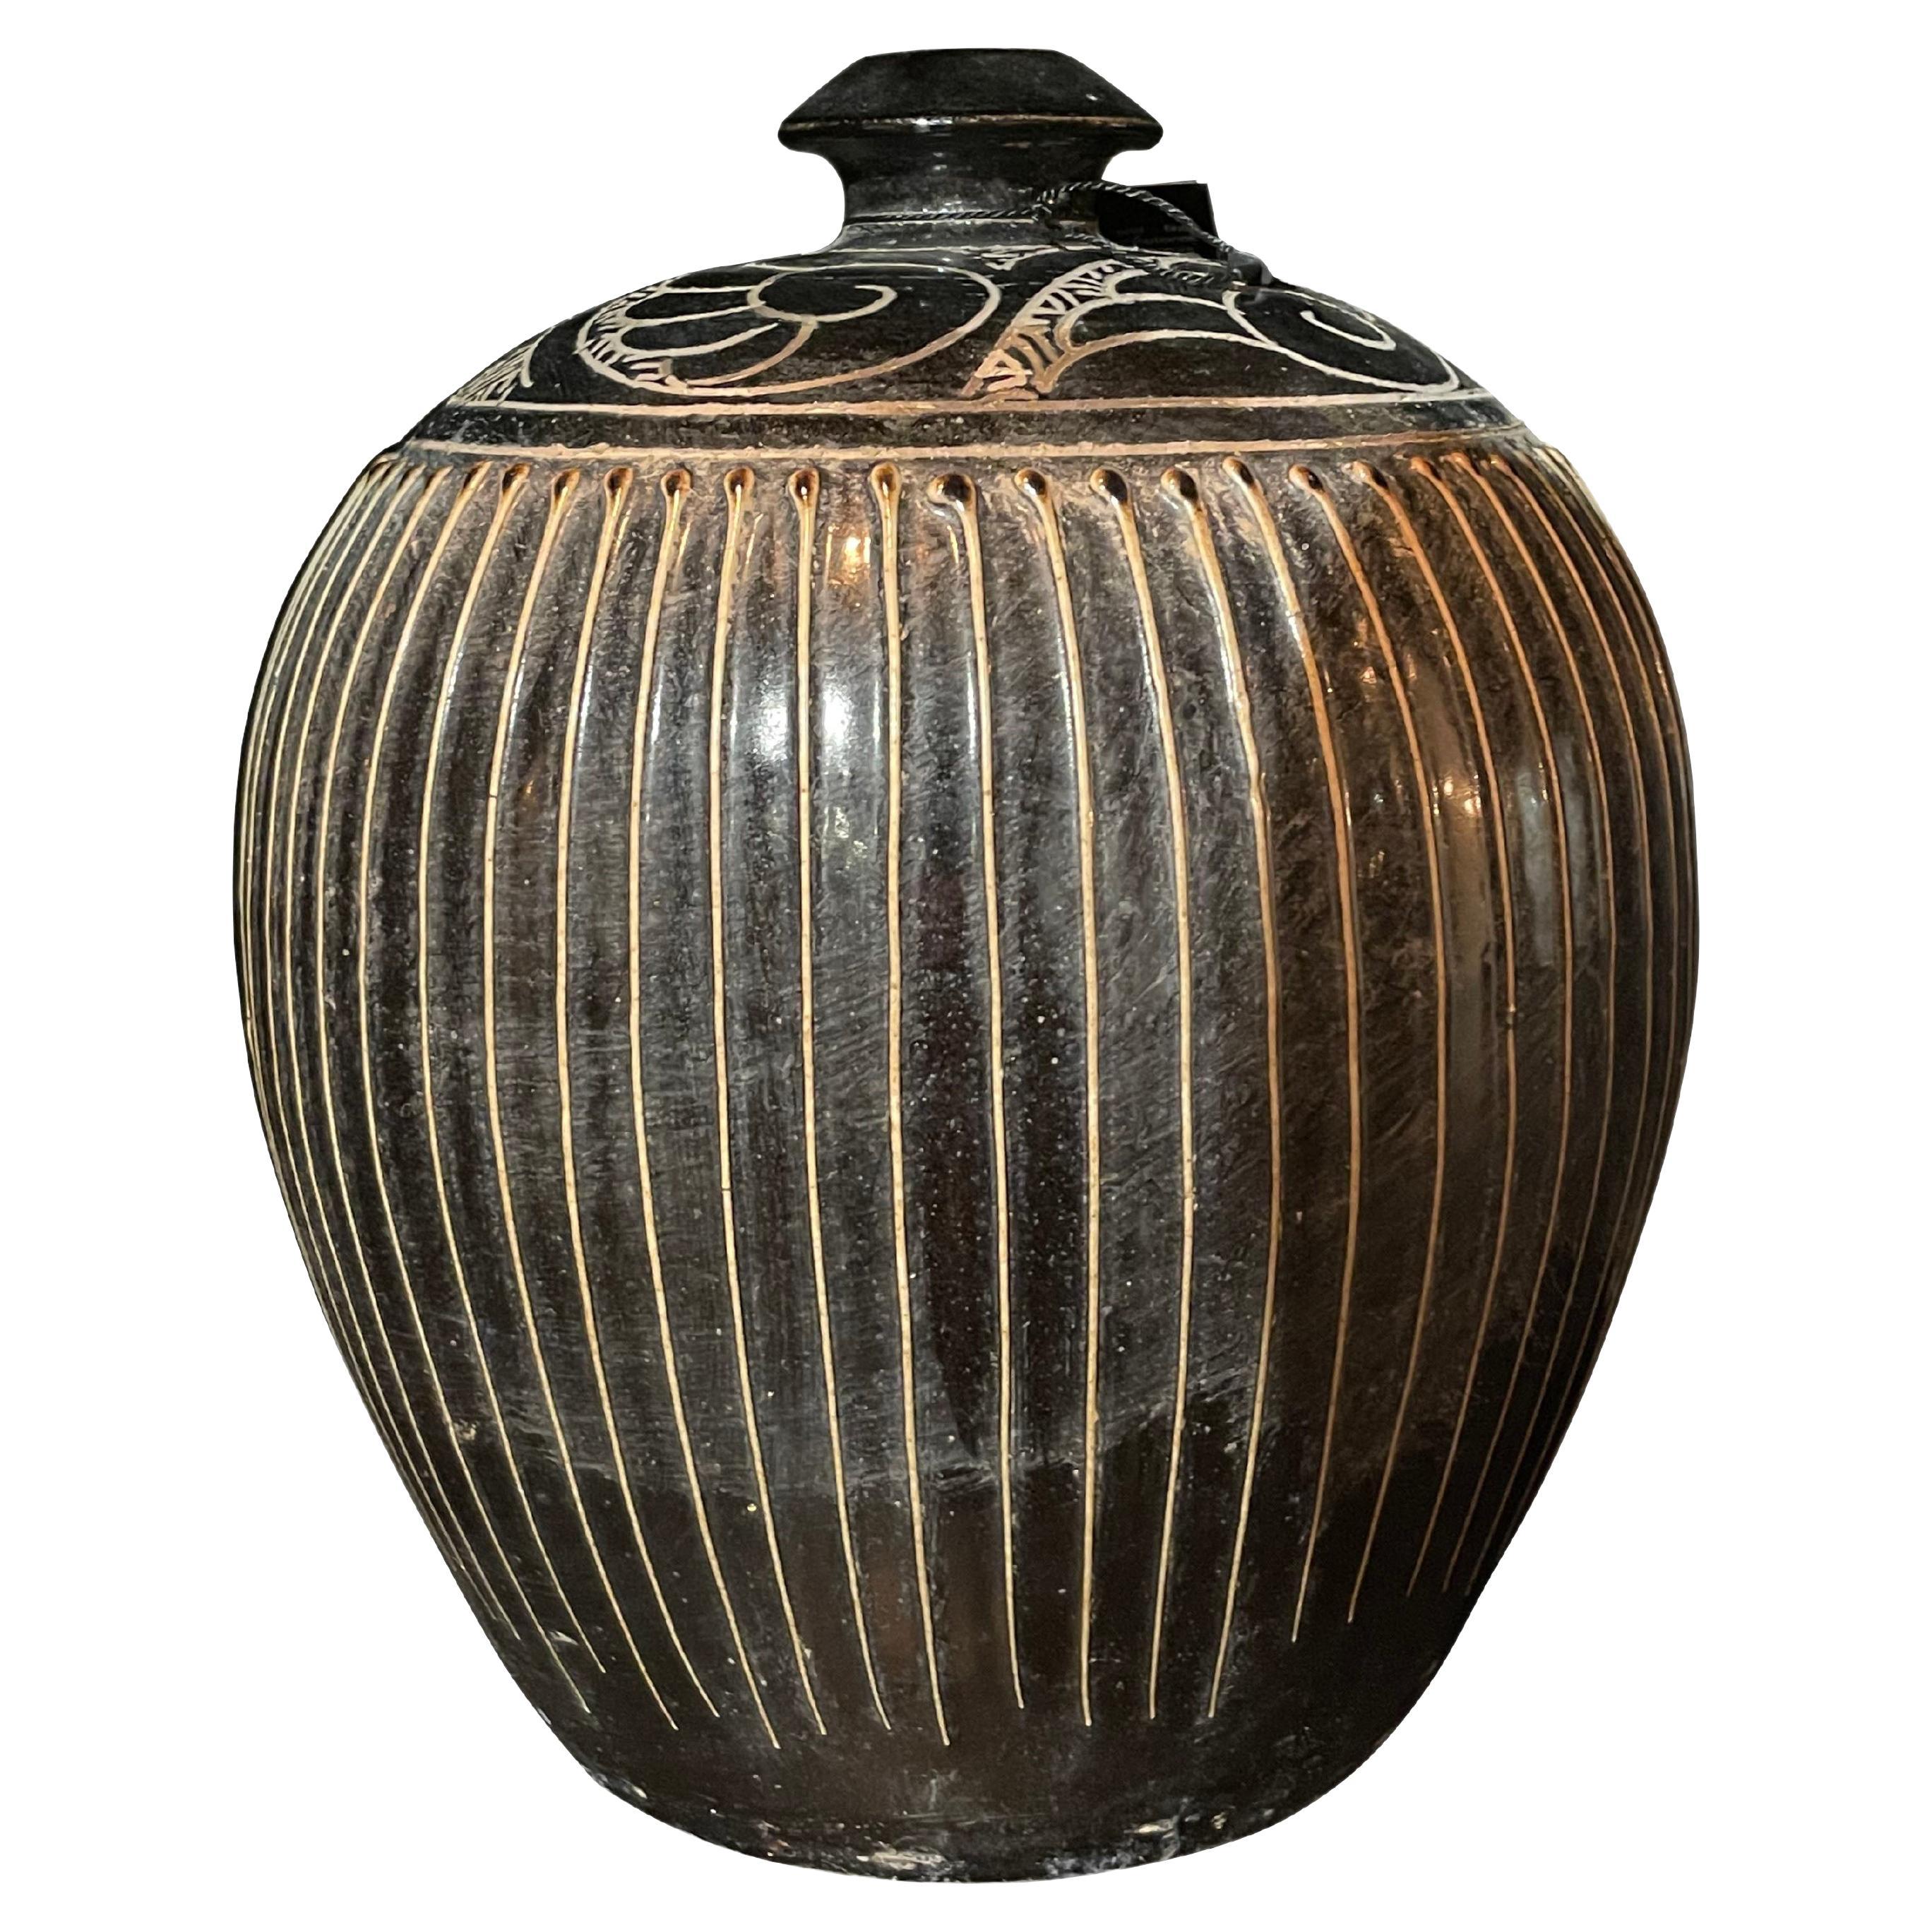 Gold and Black Stripe Vase, China, Contemporary